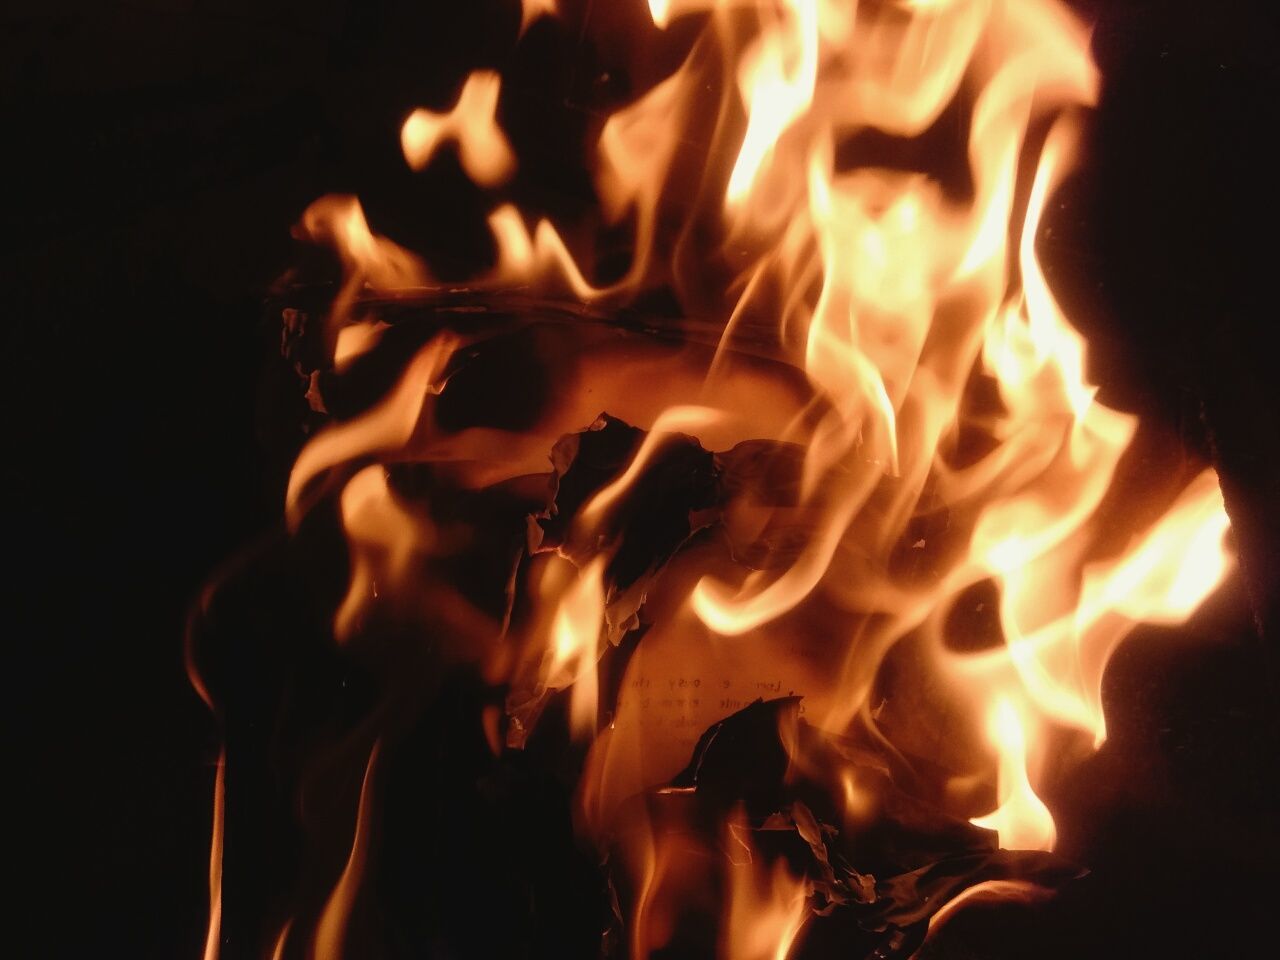 CLOSE-UP OF BONFIRE AGAINST BLACK BACKGROUND AT NIGHT